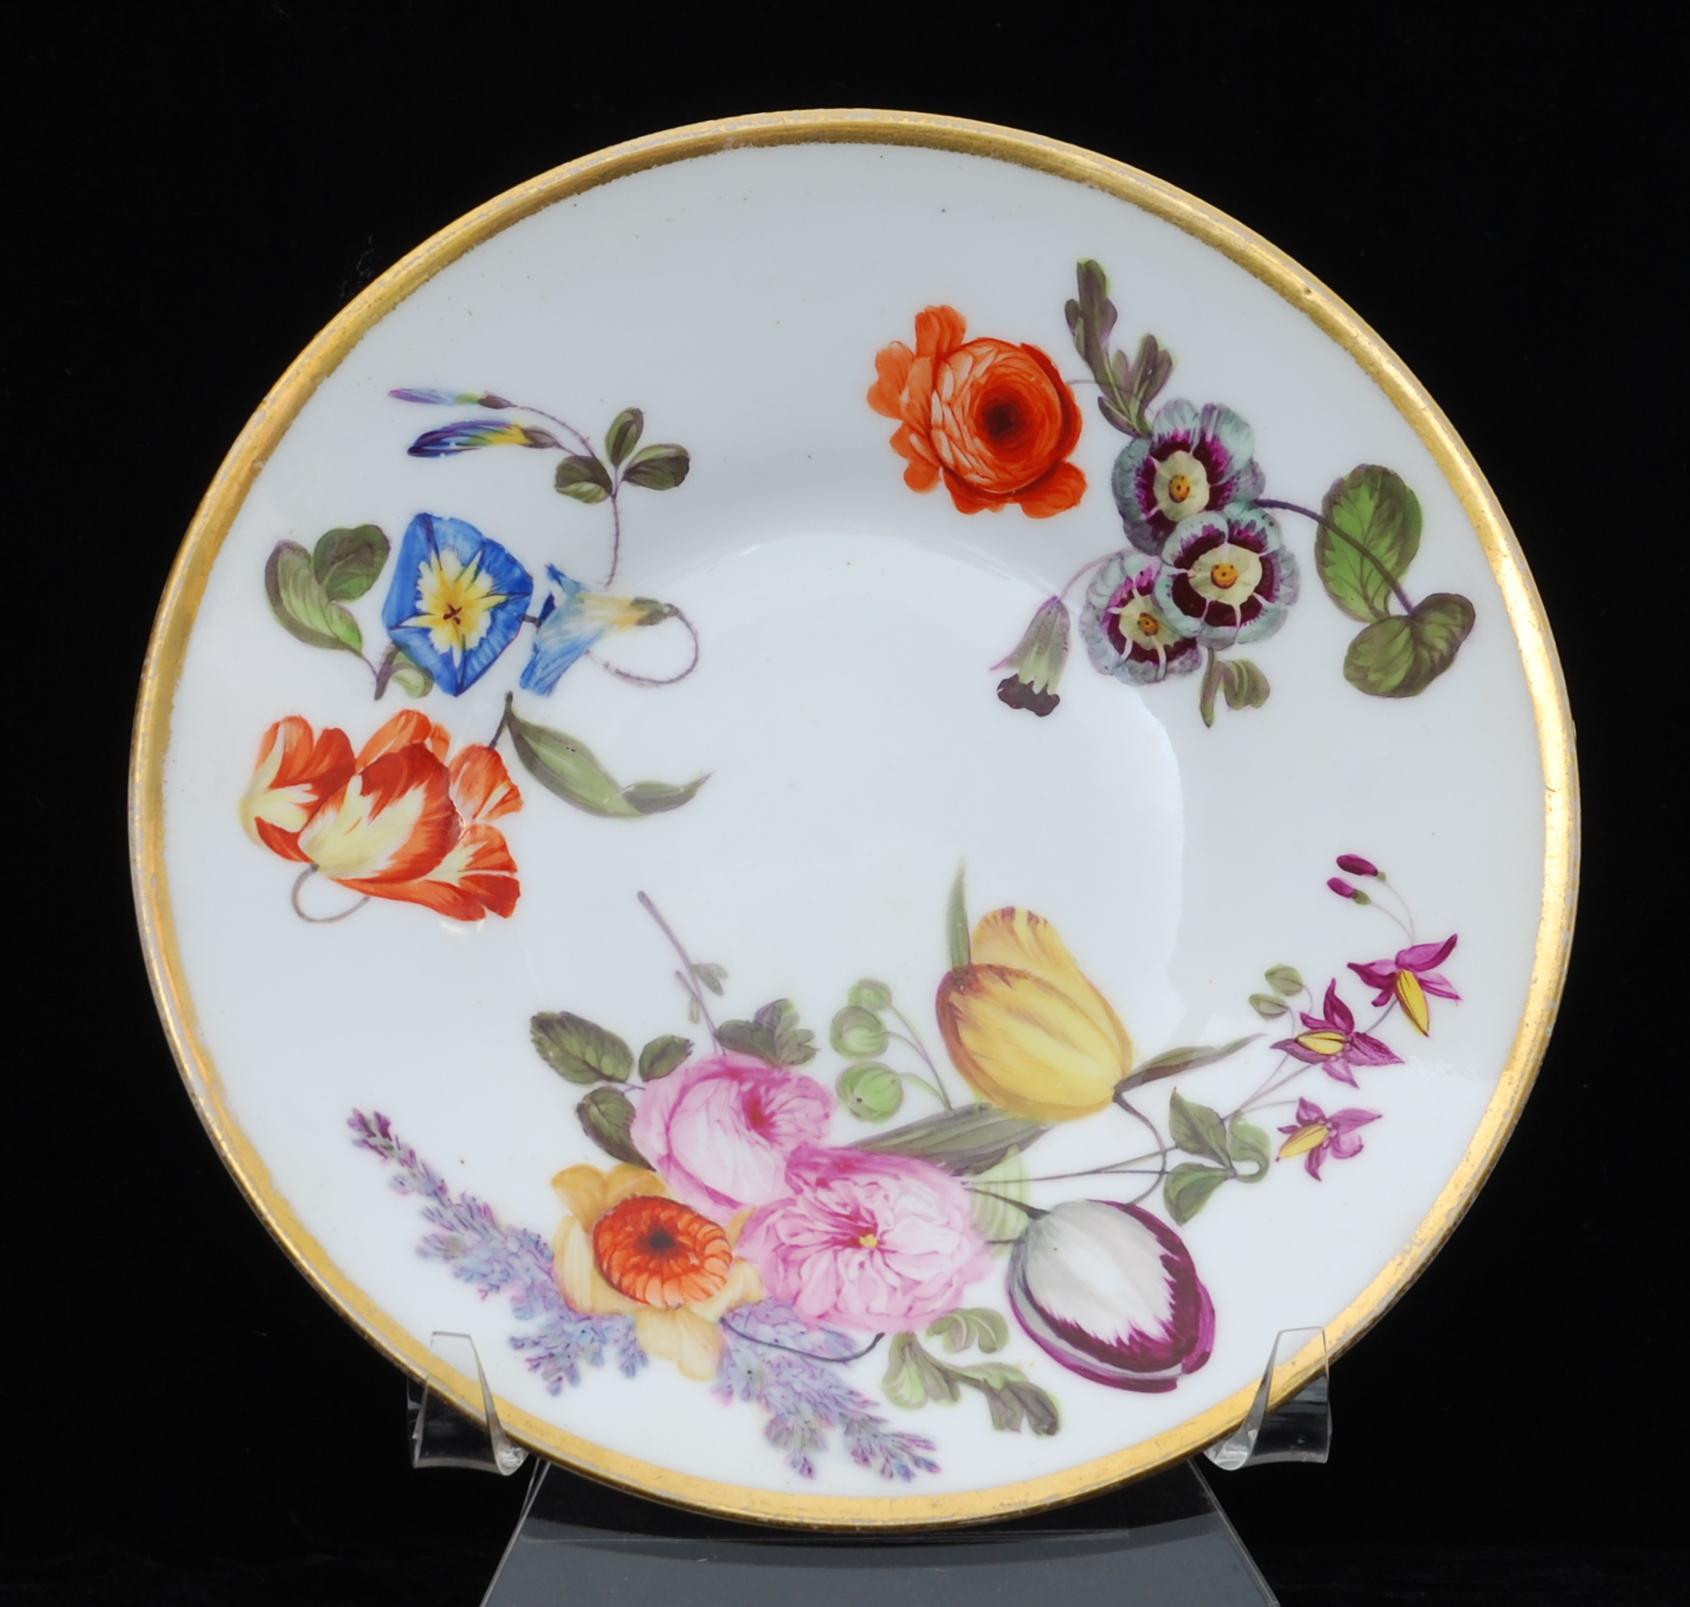 A rare tea cup and saucer in Nantgarw’s superb soft-paste porcelain. Each piece is gilded and decorated in one of the London workshops with superb flower painting, probably by Moses Webster.

The Nantgarw factory lasted only a few years, but their